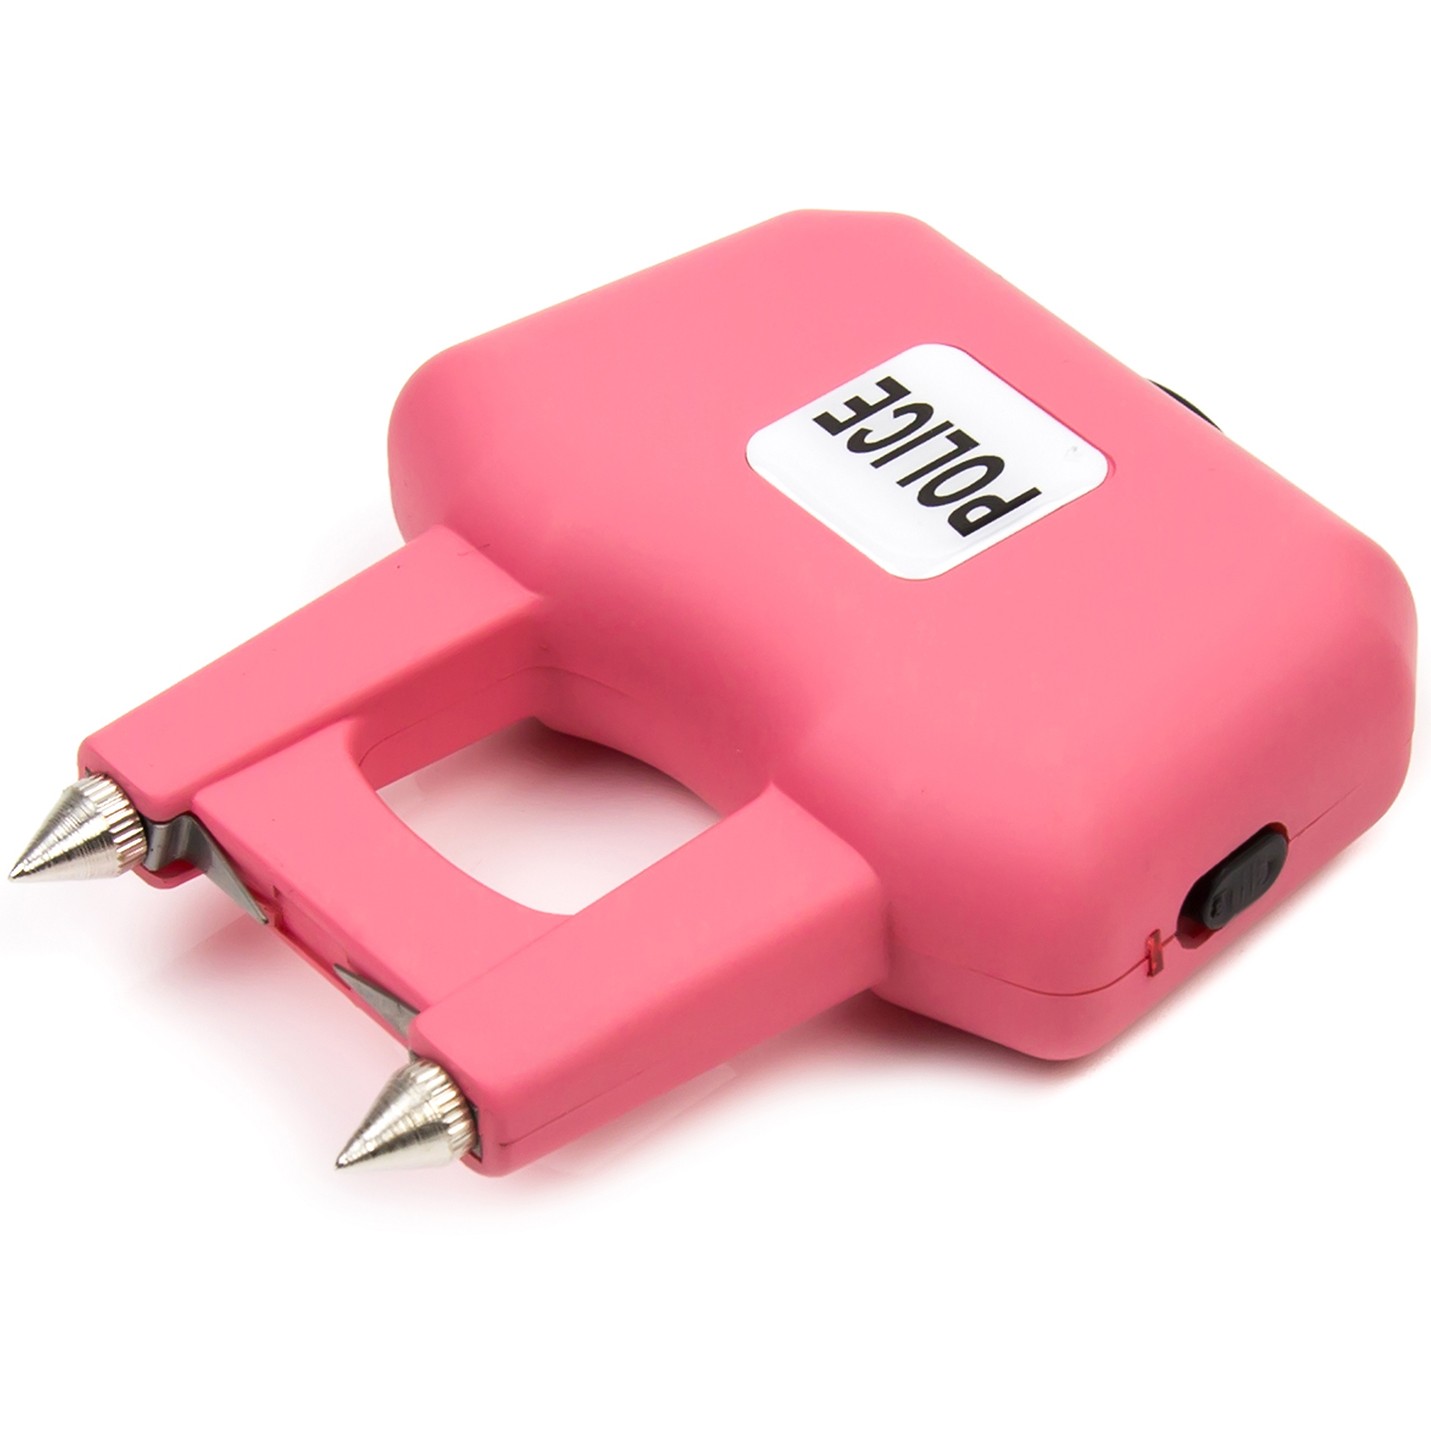 Police 510 58 Billion Mini Sting Ring Stun Gun Rechargeable Pink Policemart Best Security Products For Sale